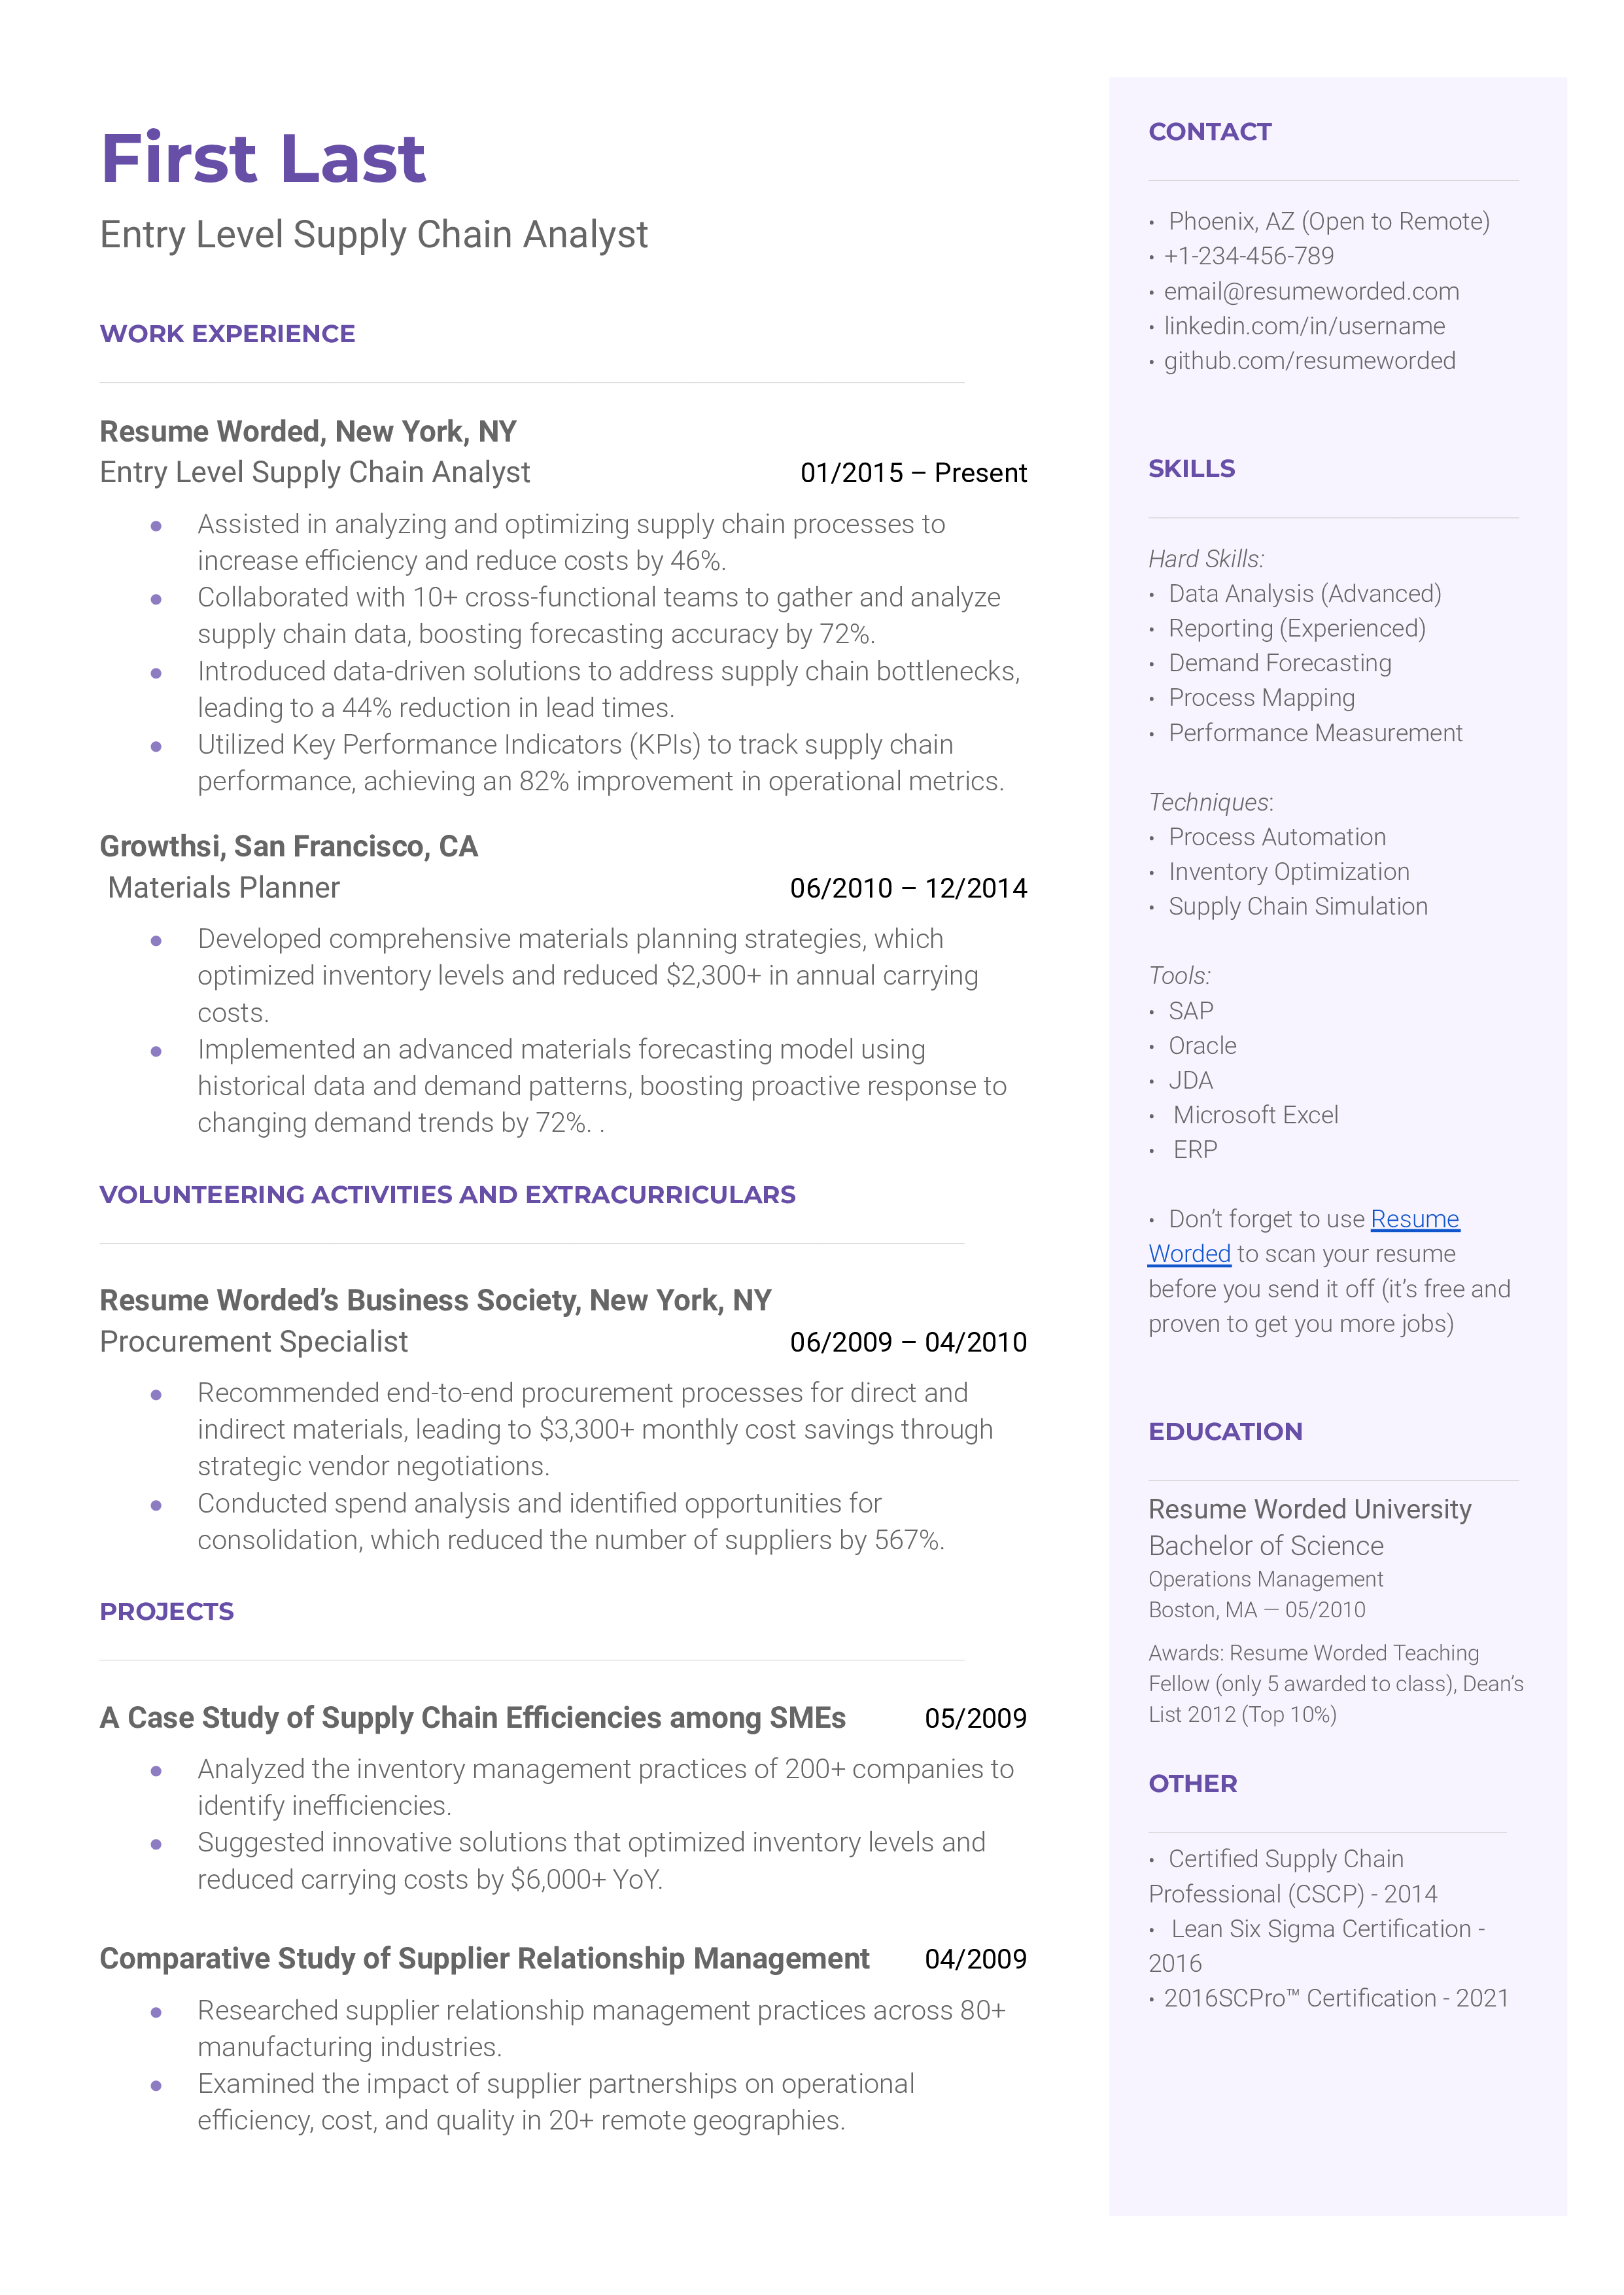 A screenshot of a resume for an entry level supply chain analyst role.